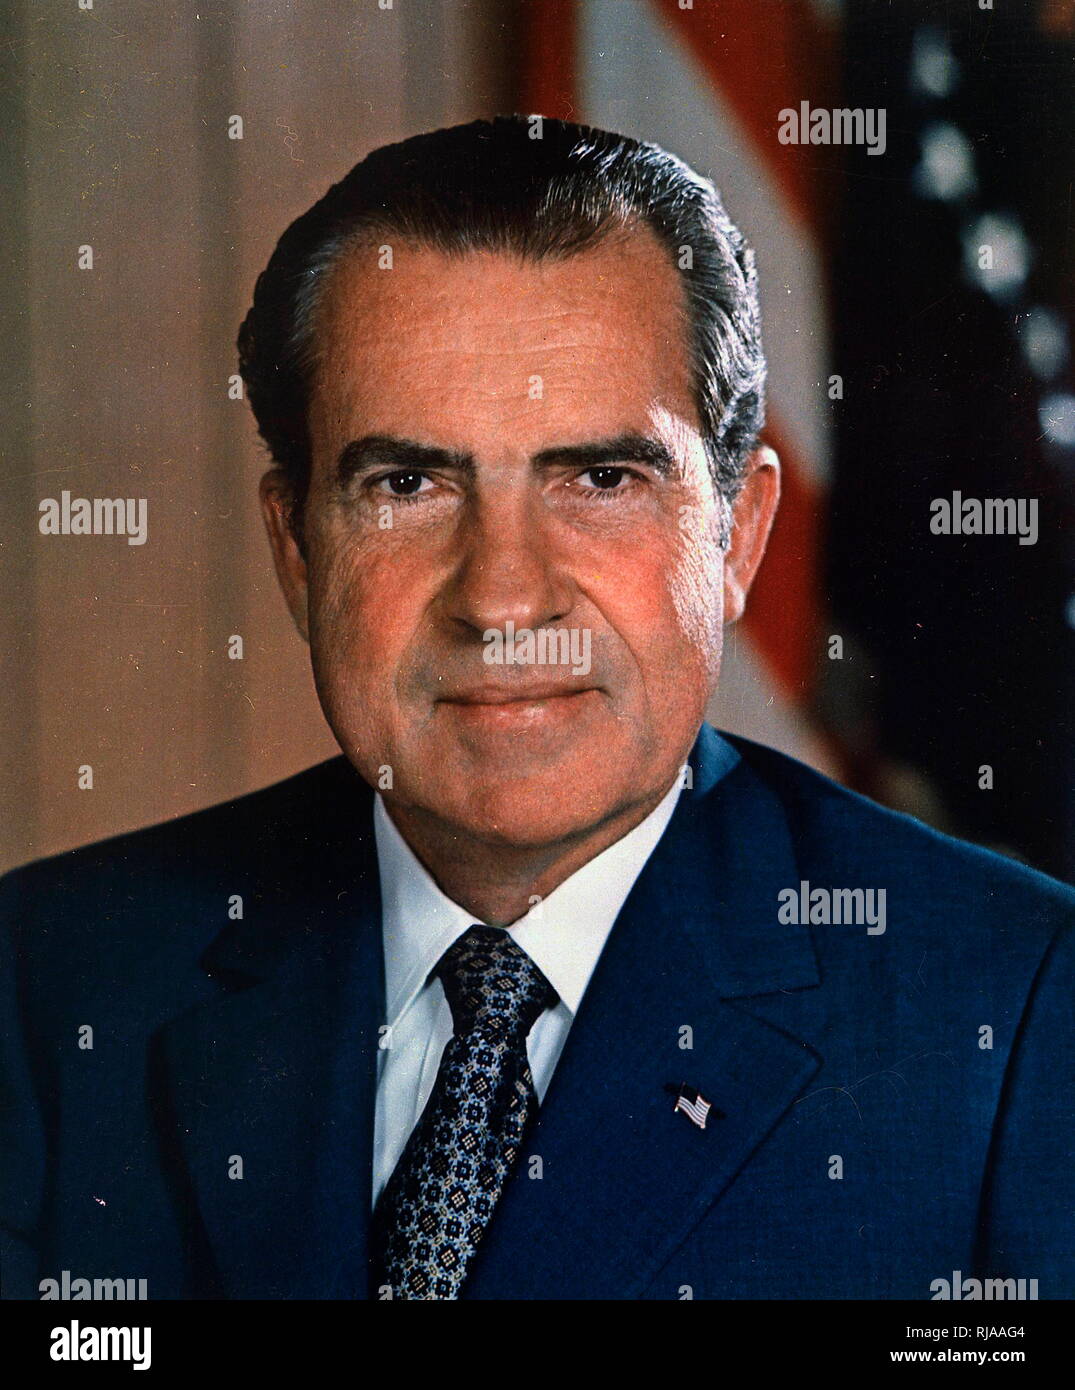 Richard Milhous Nixon (1913 – 1994), the 37th President of the United States, serving from 1969 until 1974. he resigned from office, the only U.S. president to do so. He had previously served as the 36th Vice President of the United States from 1953 to 1961, and prior to that as a U.S. Representative and also Senator from California. Stock Photo